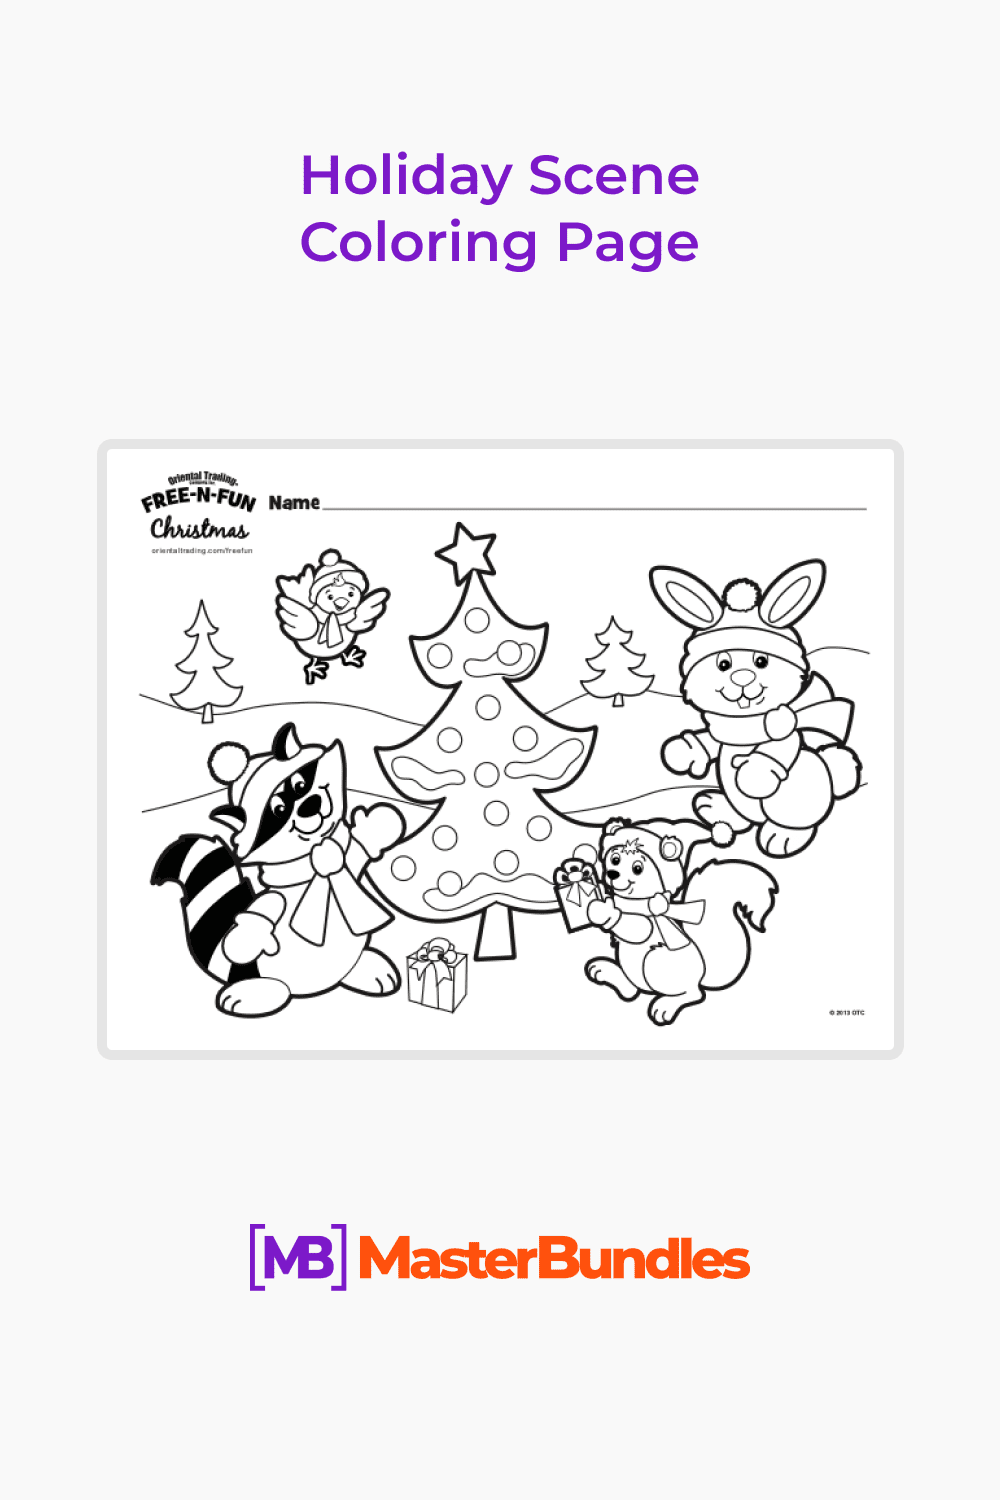 Holiday scene coloring page pinterest image.